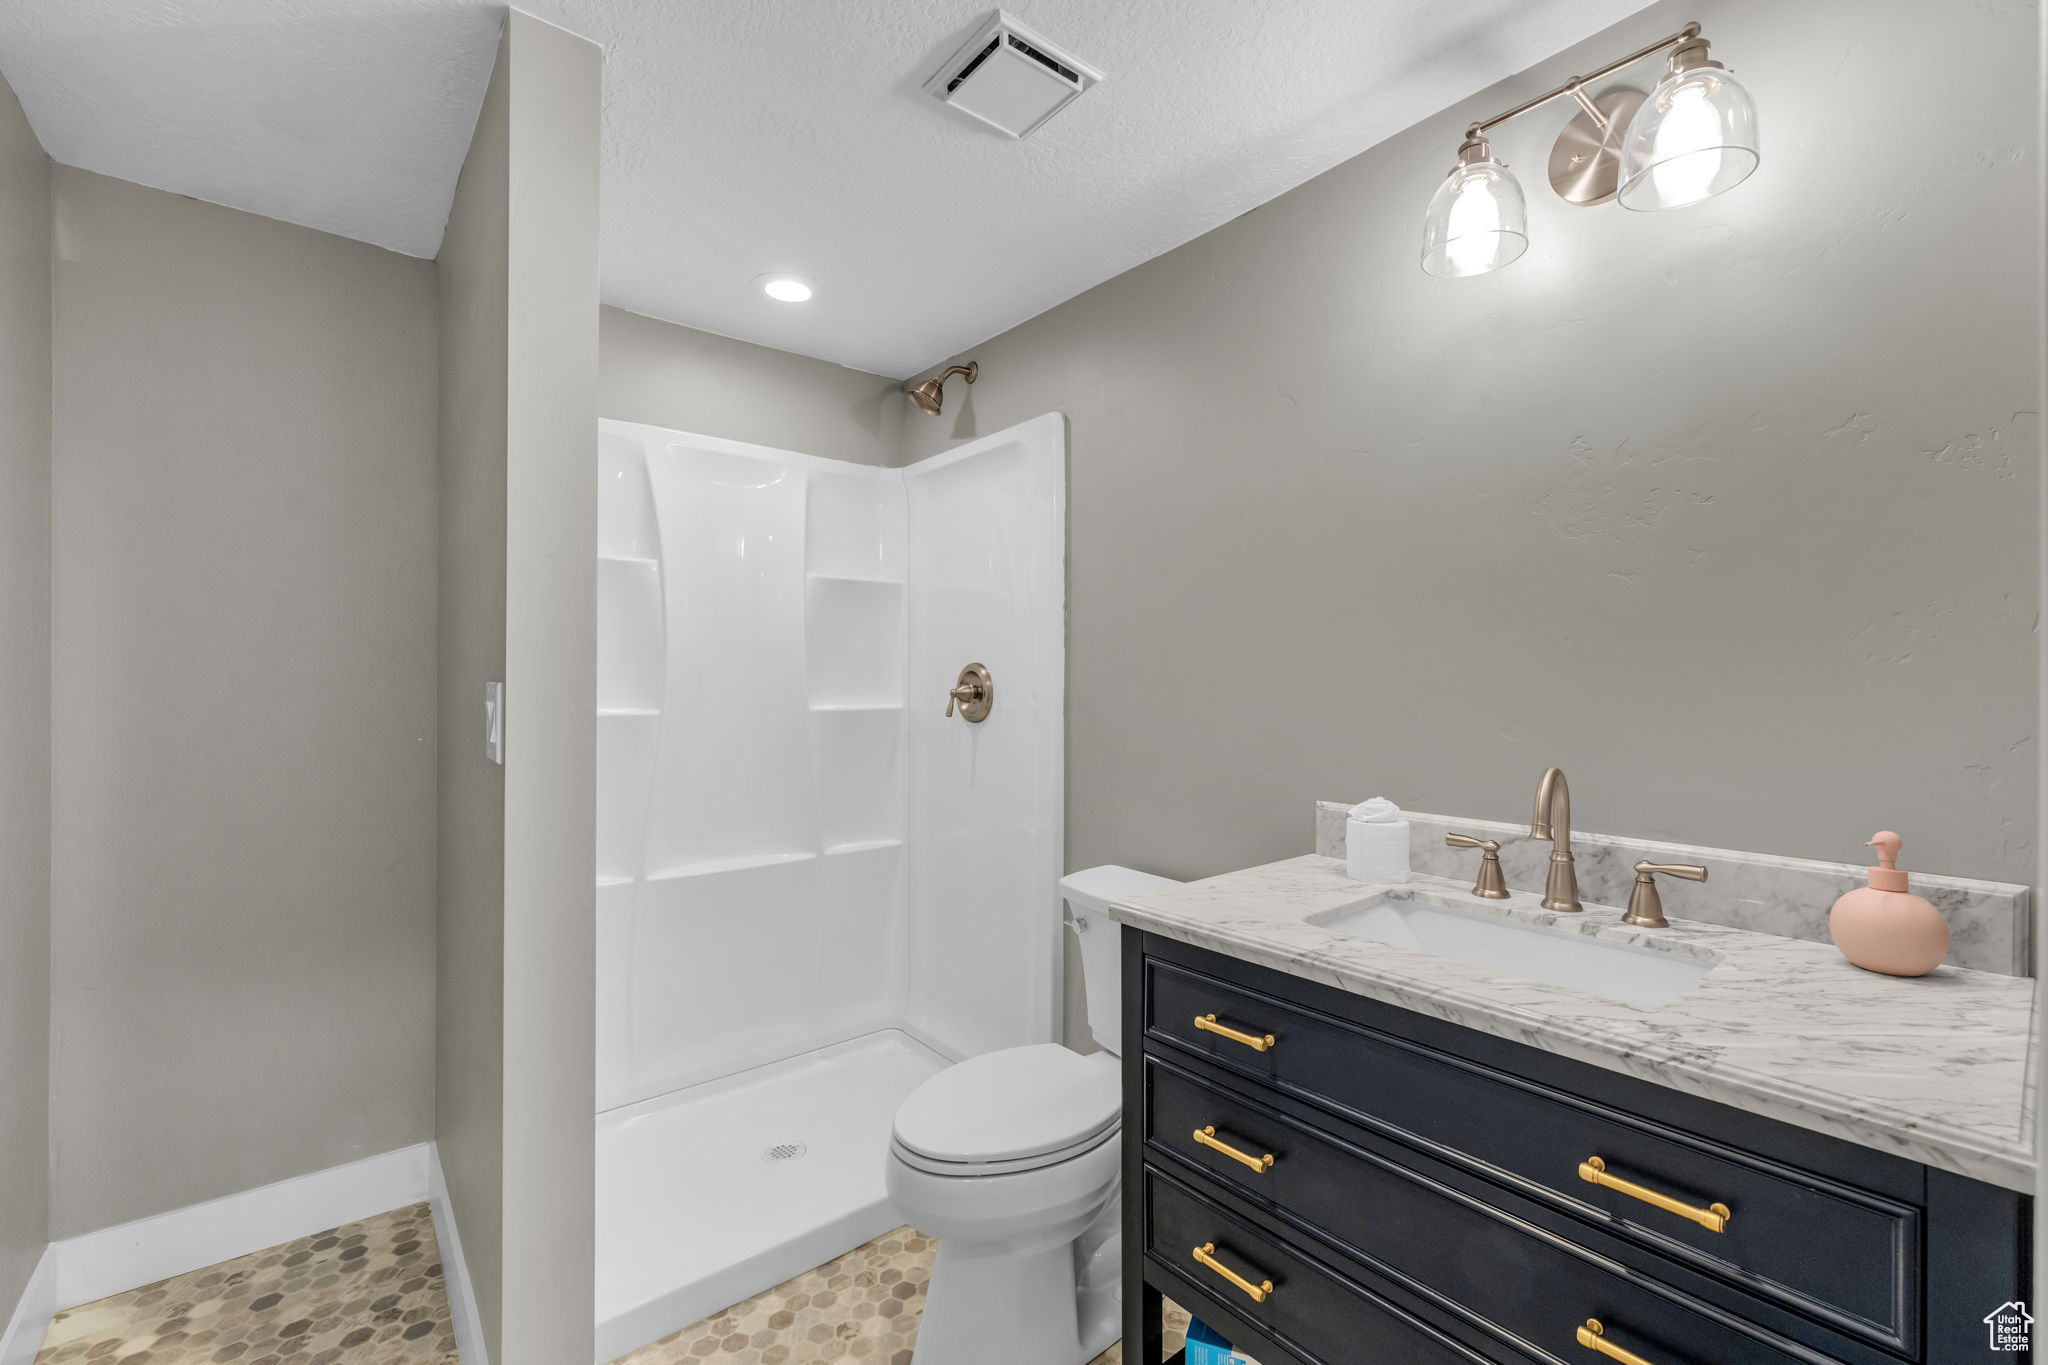 Bathroom featuring a textured ceiling, walk in shower, toilet, tile floors, and vanity